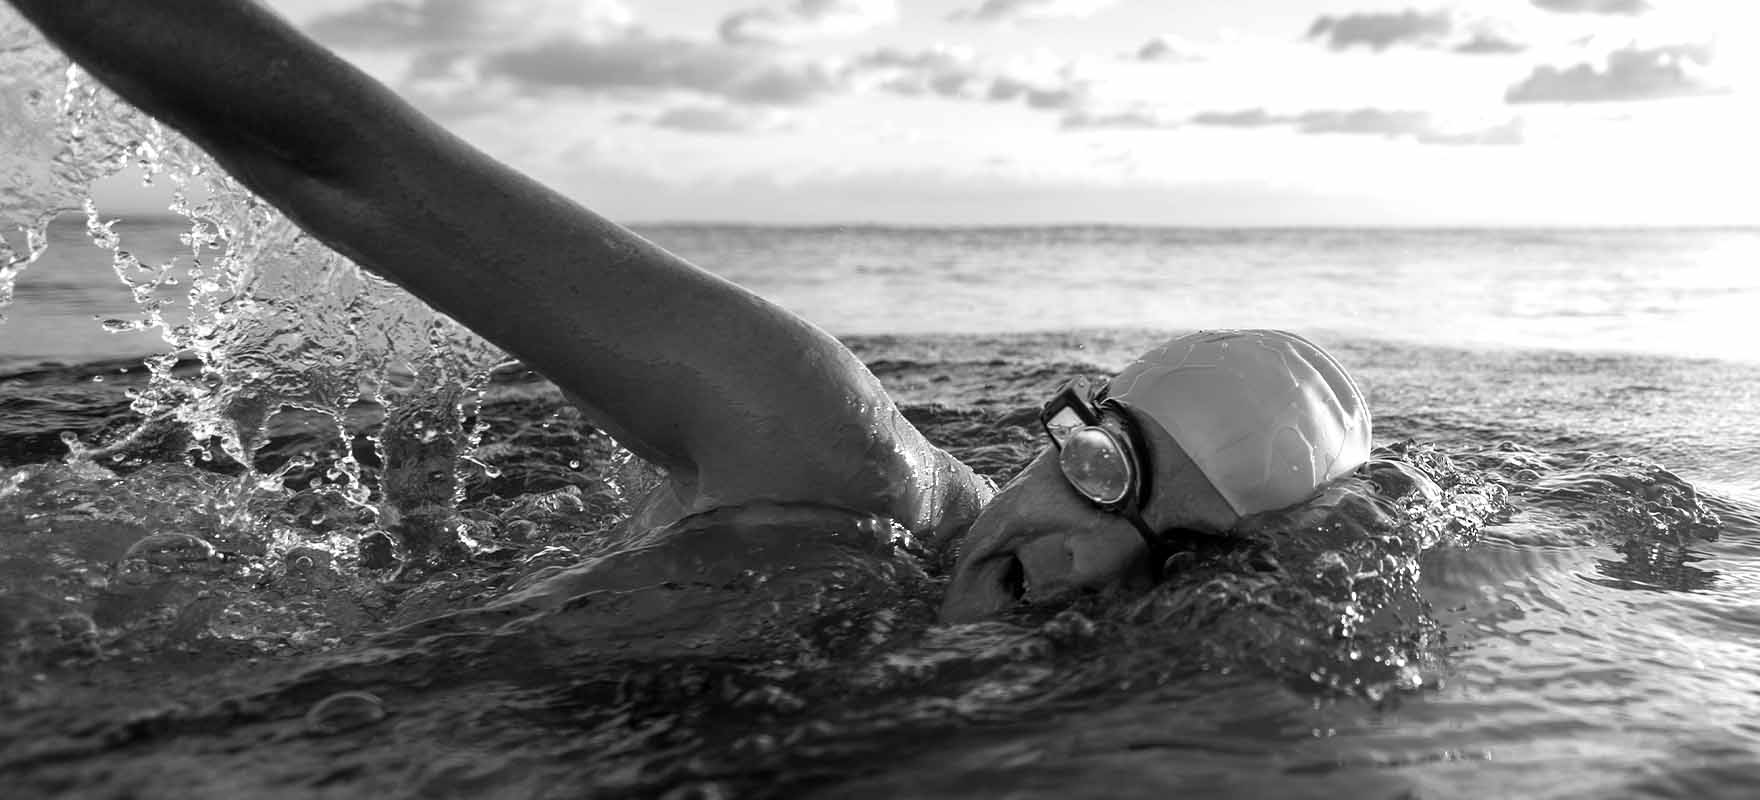 An athlete side breathing while swimming in open water